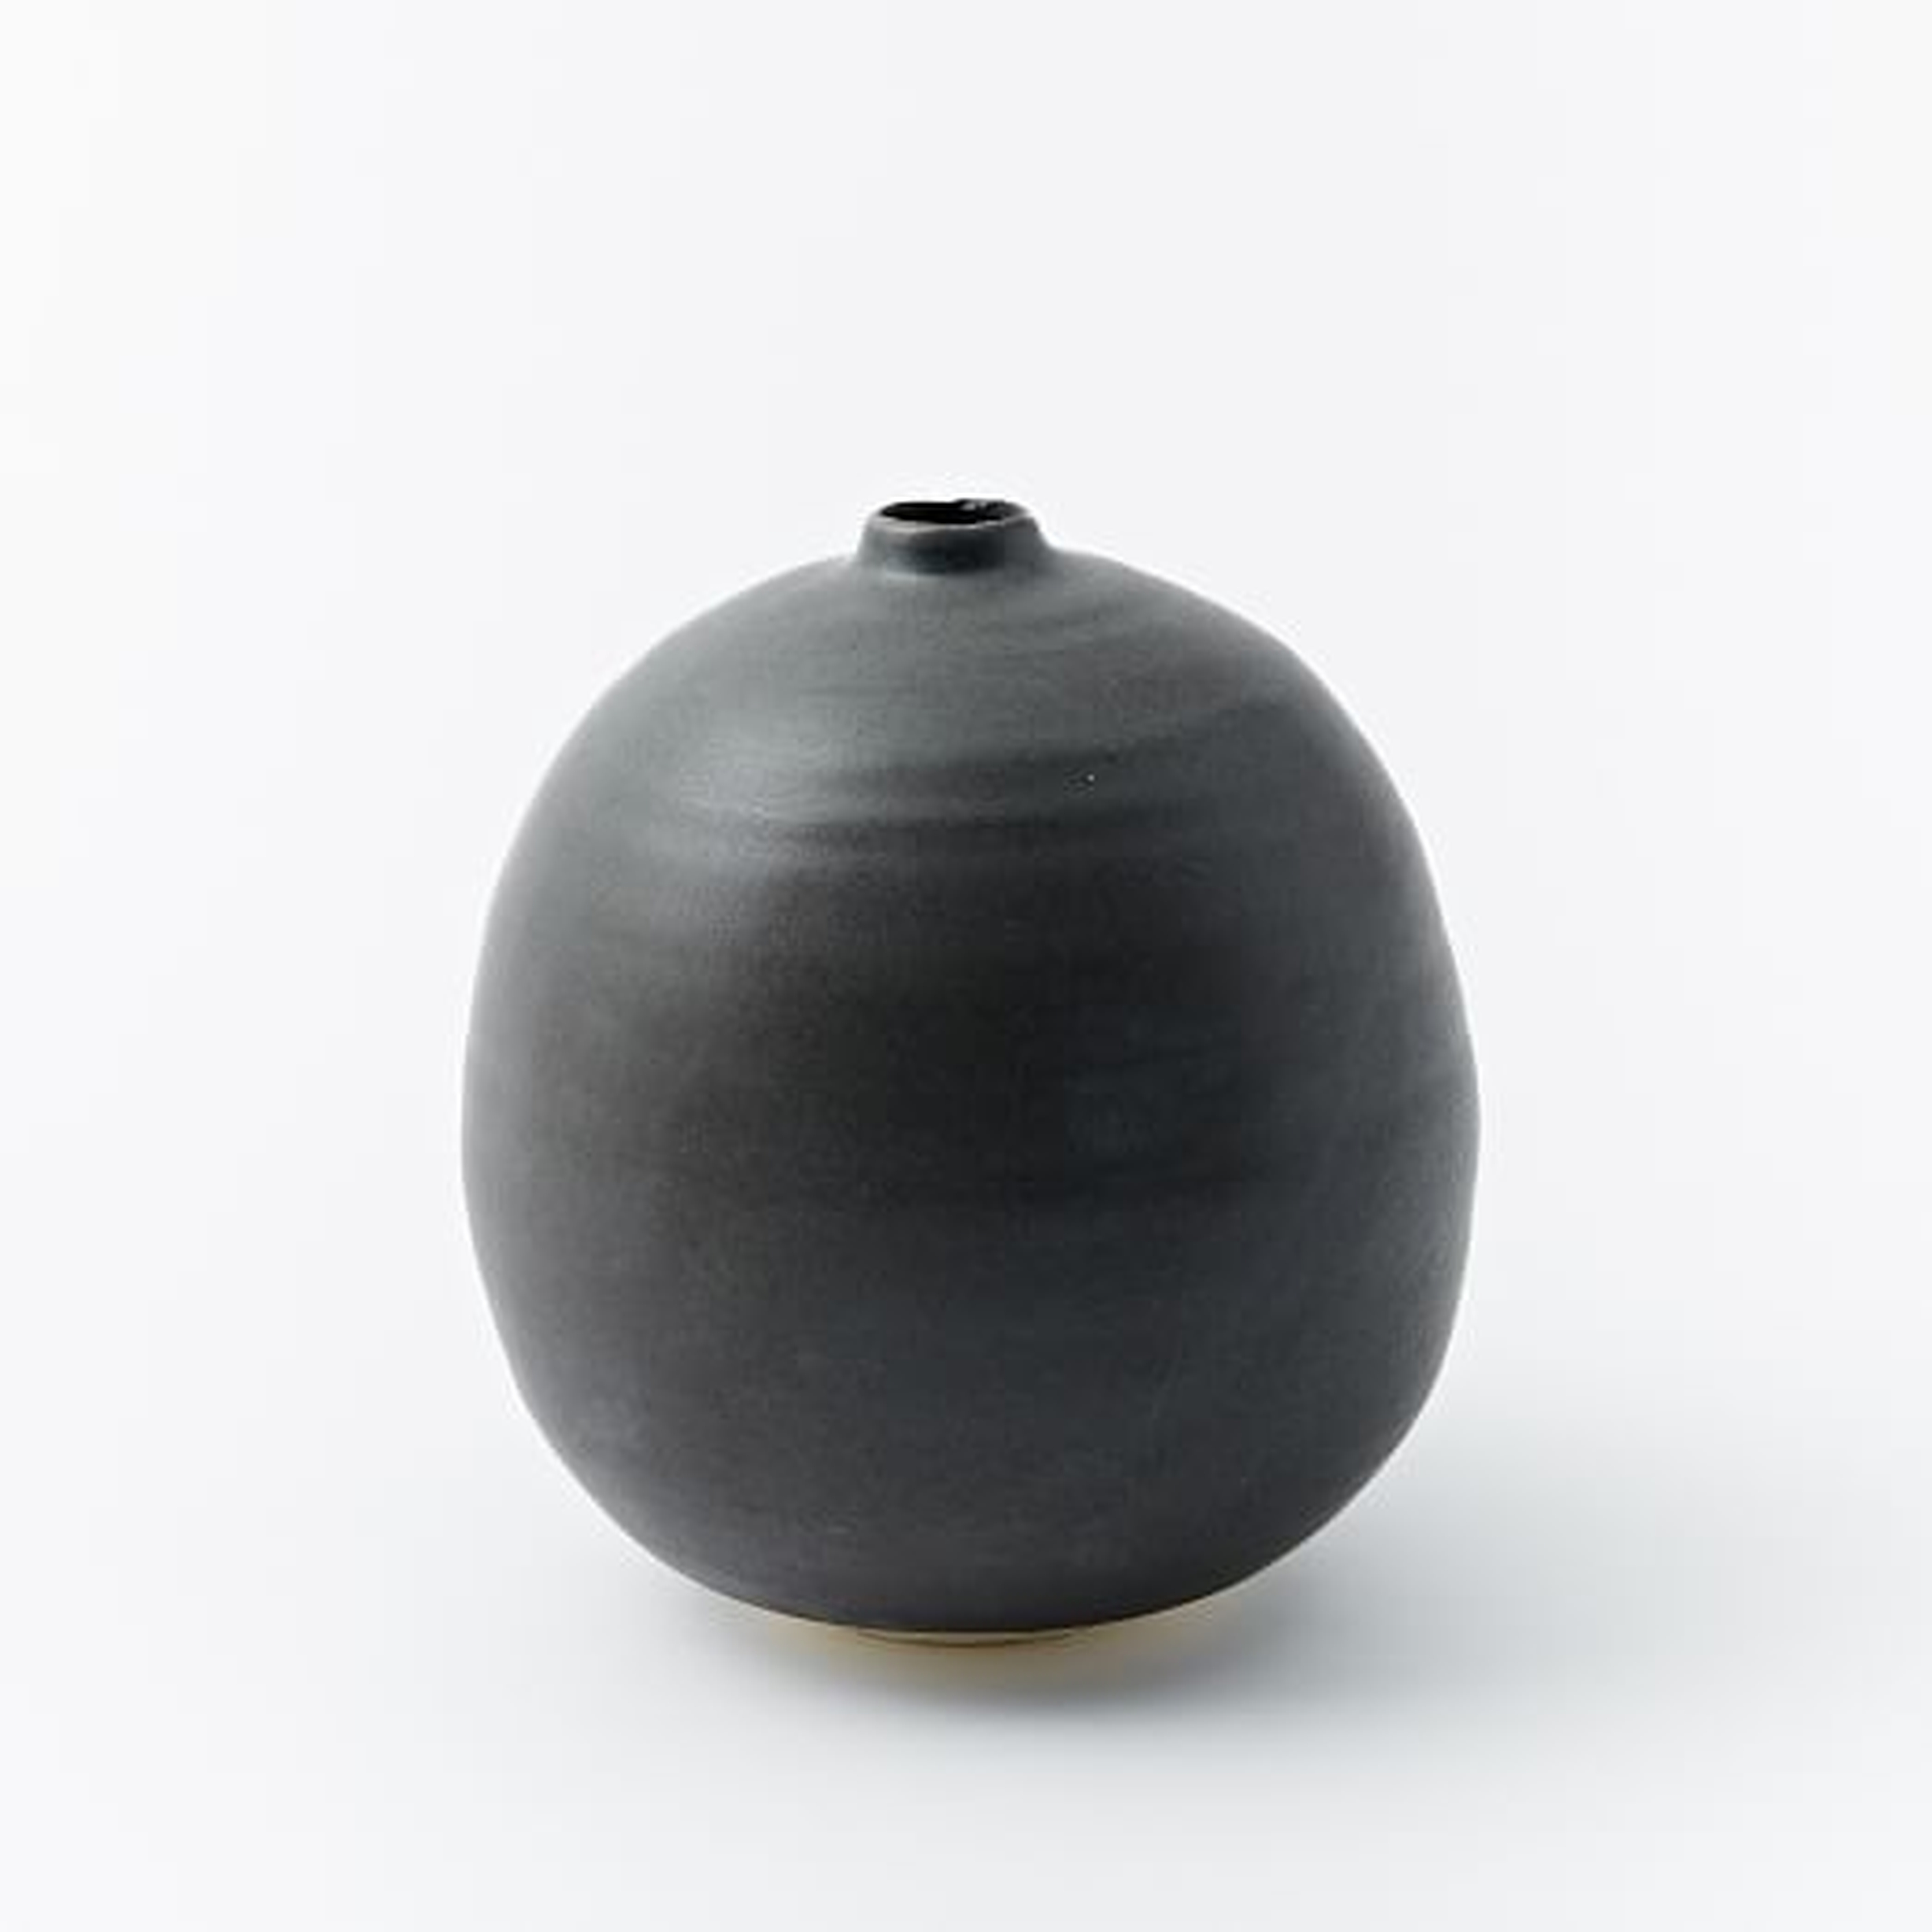 Judy Jackson Stoneware Vase - Tall, Oval And Round - 7"H - West Elm